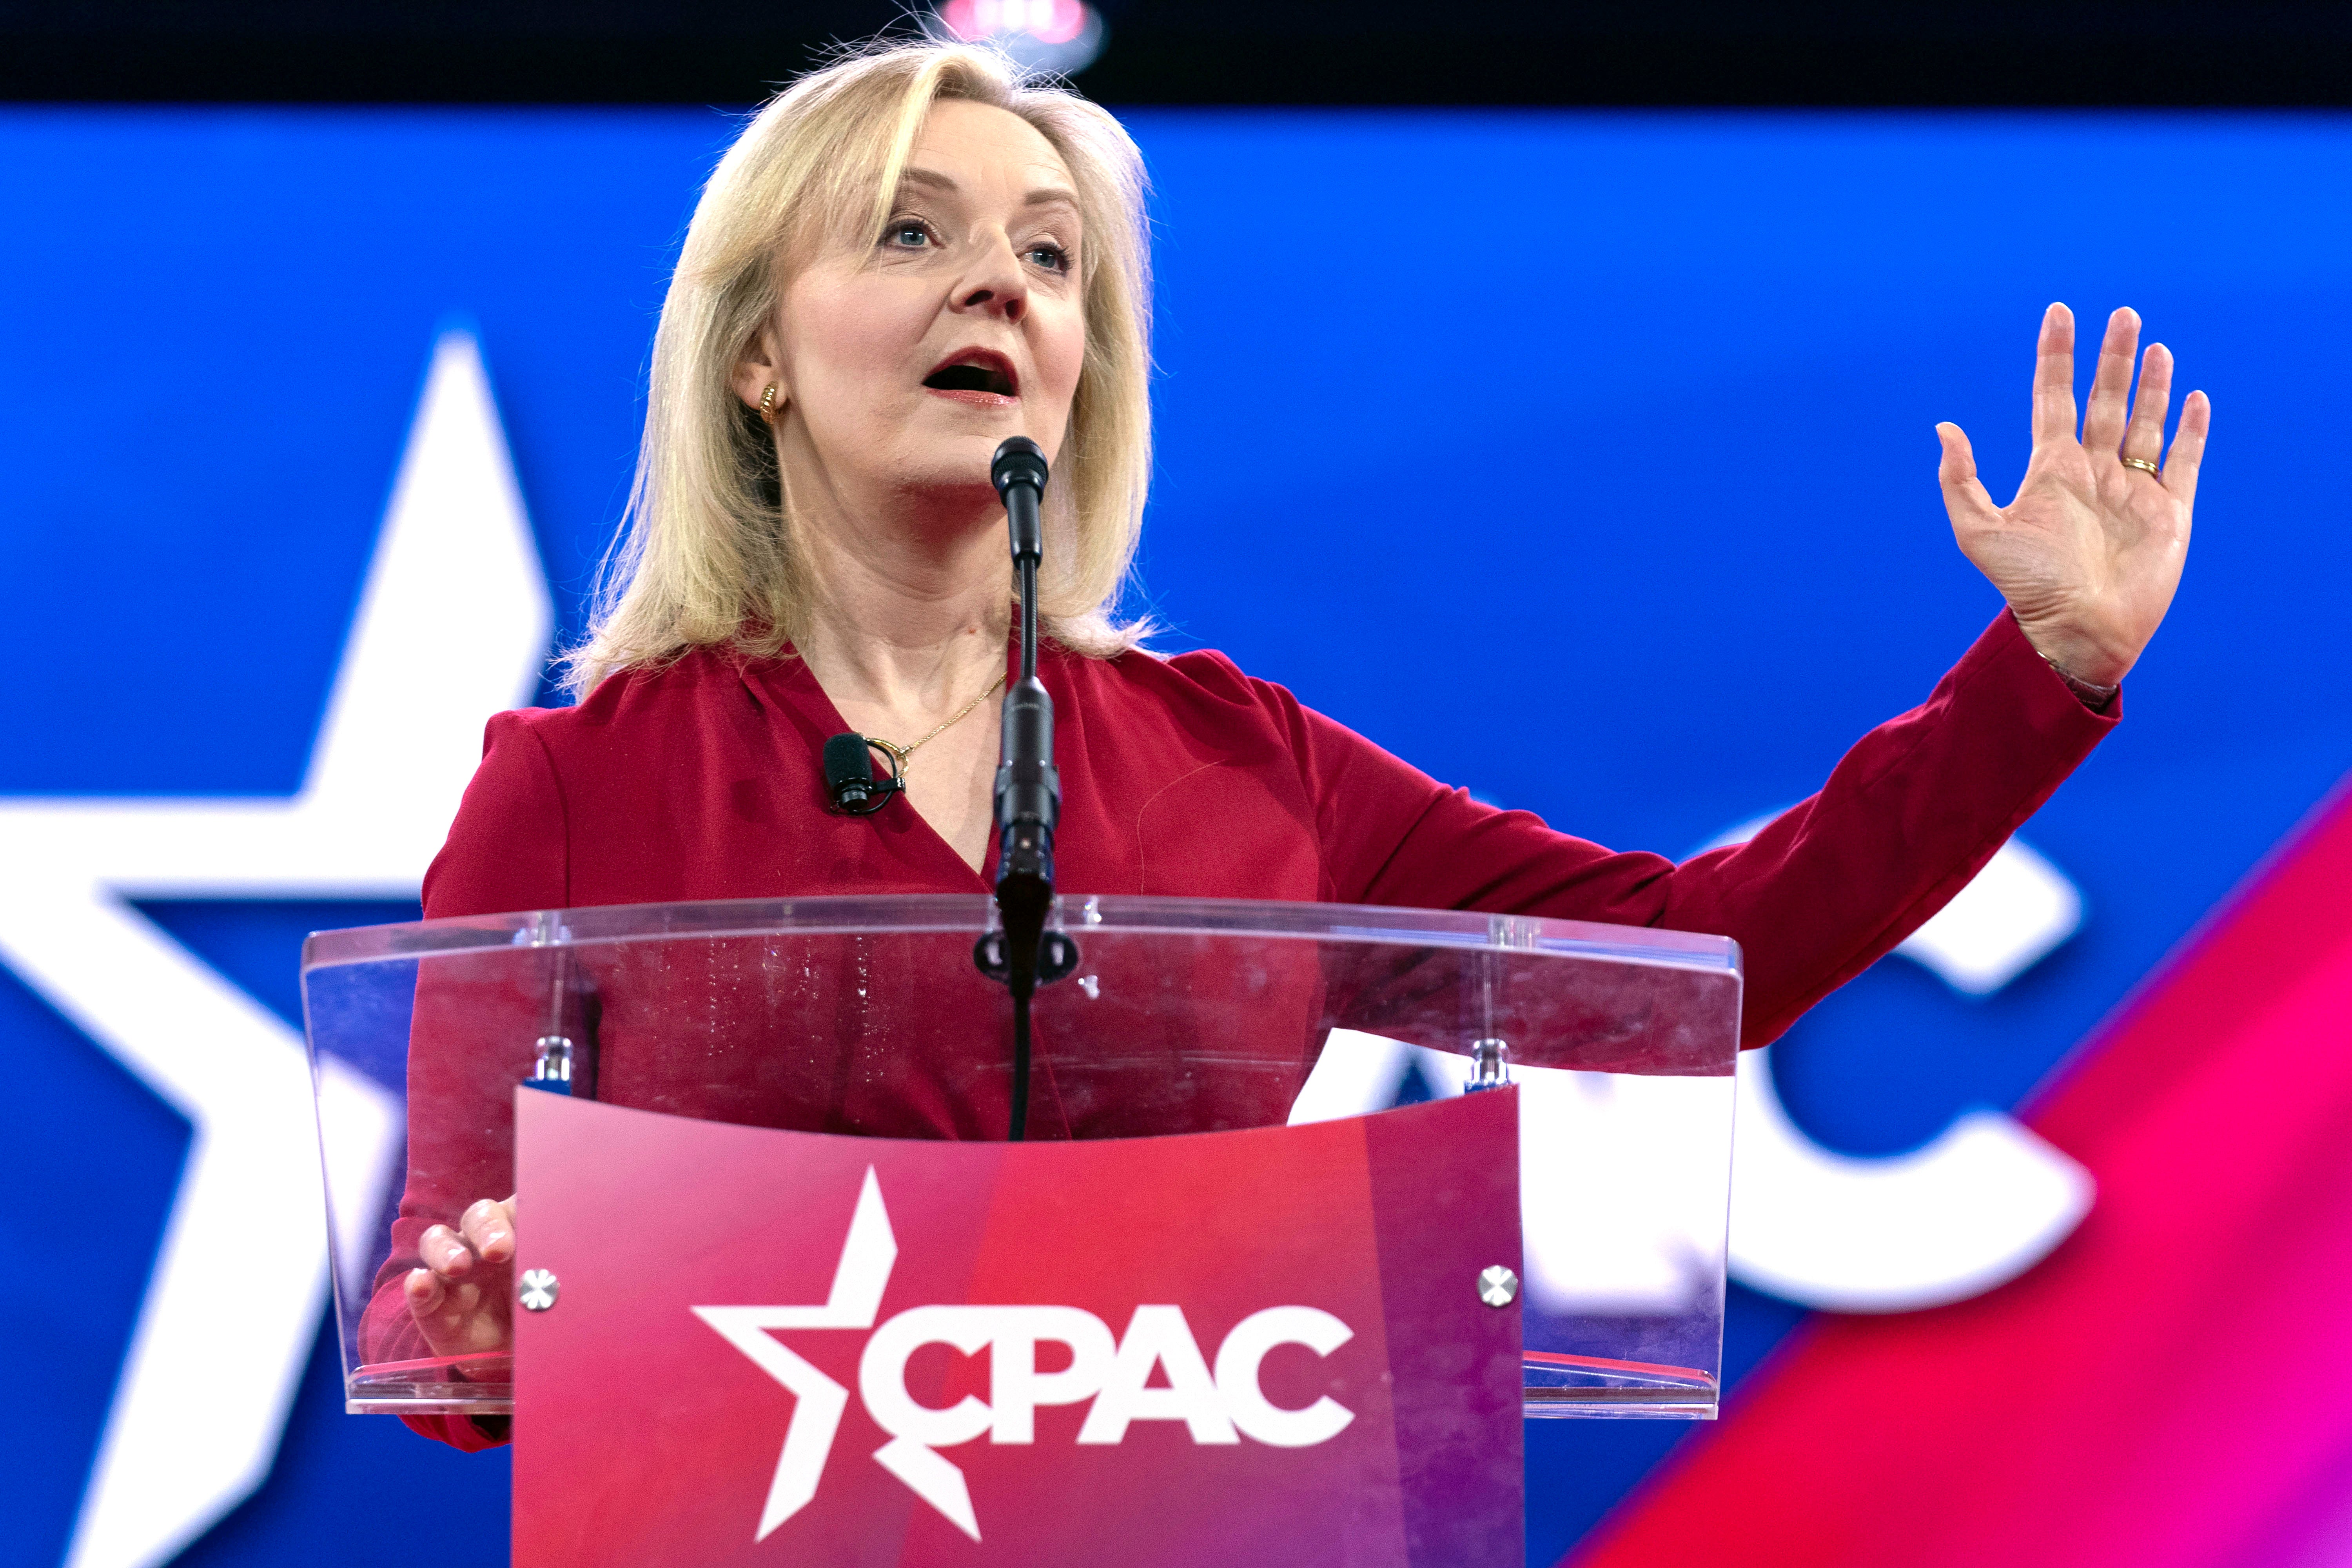 Ms Truss speaking at the Conservative Political Action Conference (CPAC) in the US